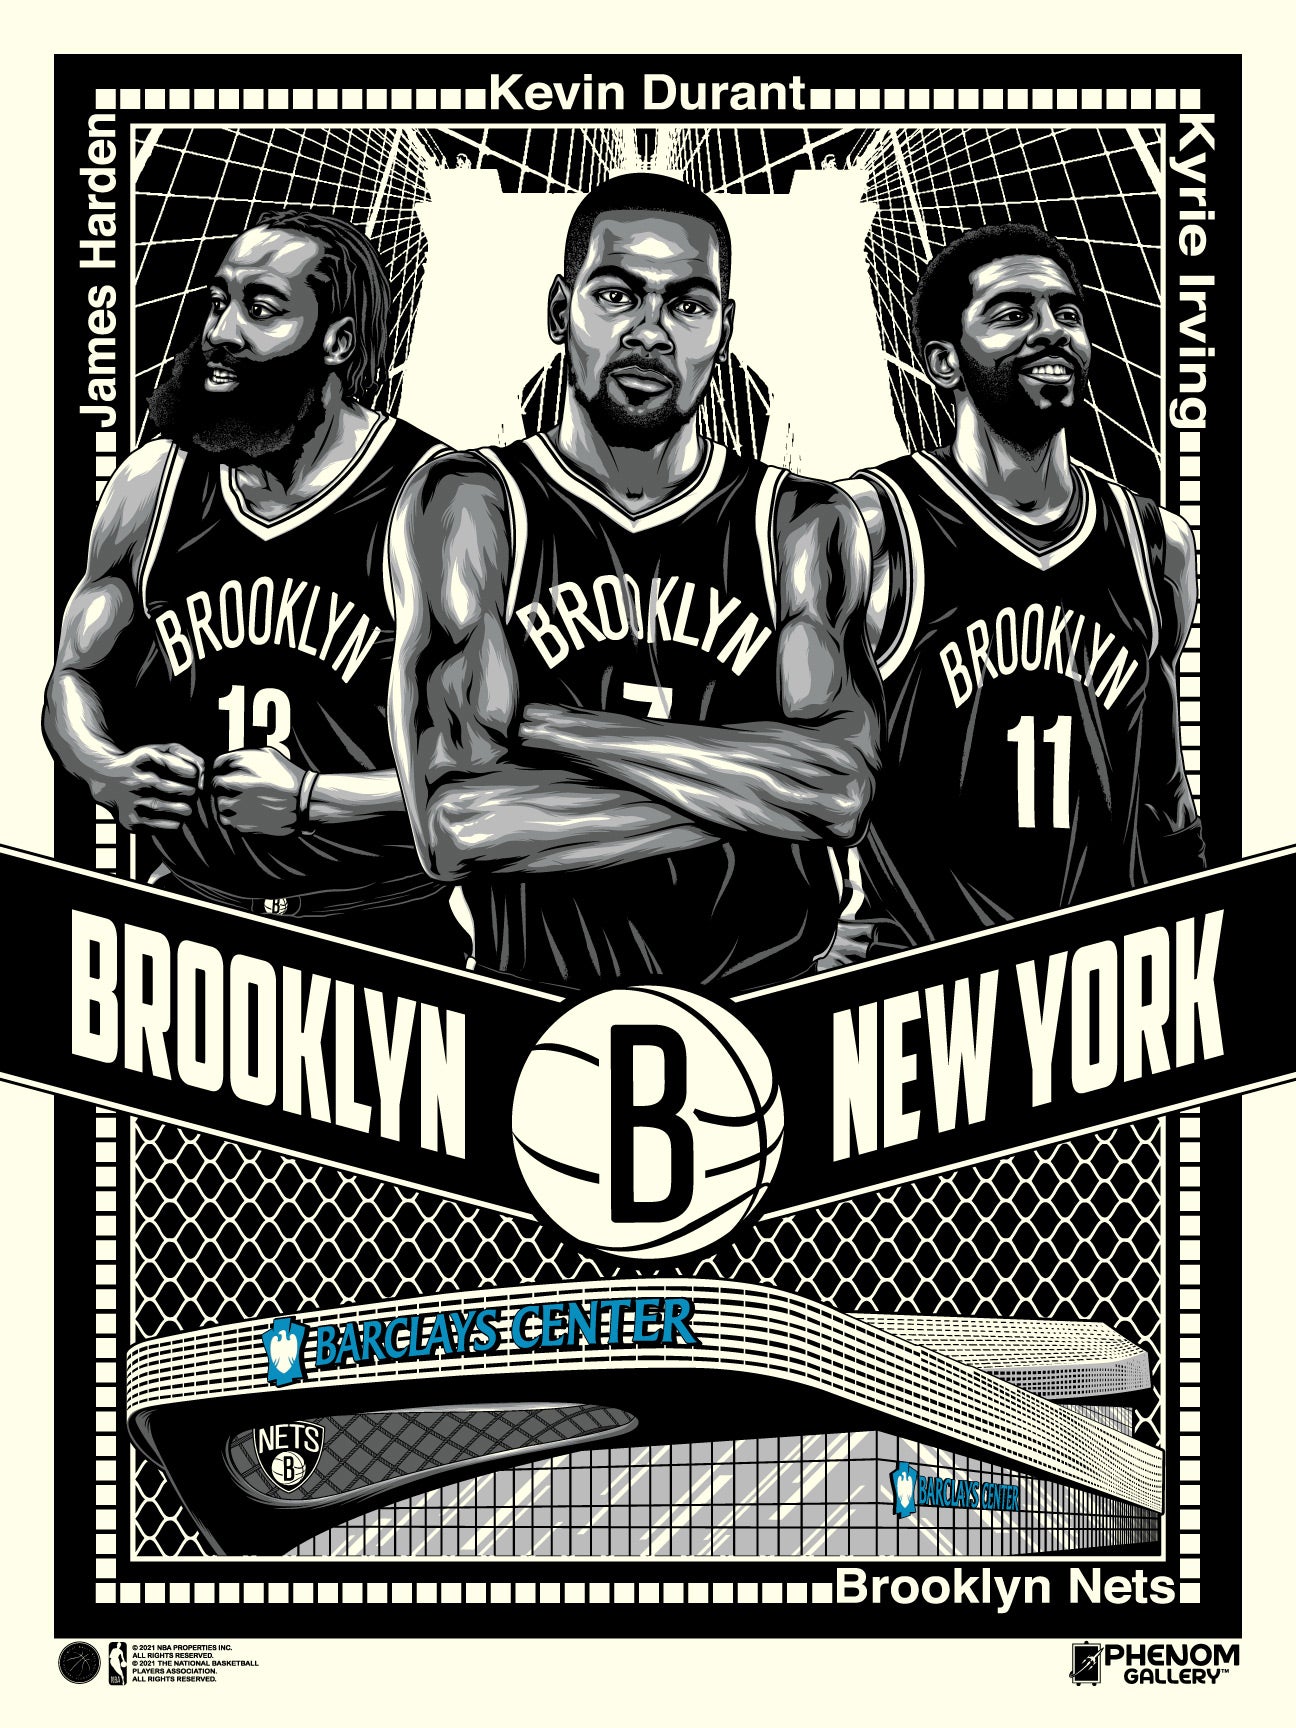 History of the Nets: From Teaneck to Brooklyn [Book]